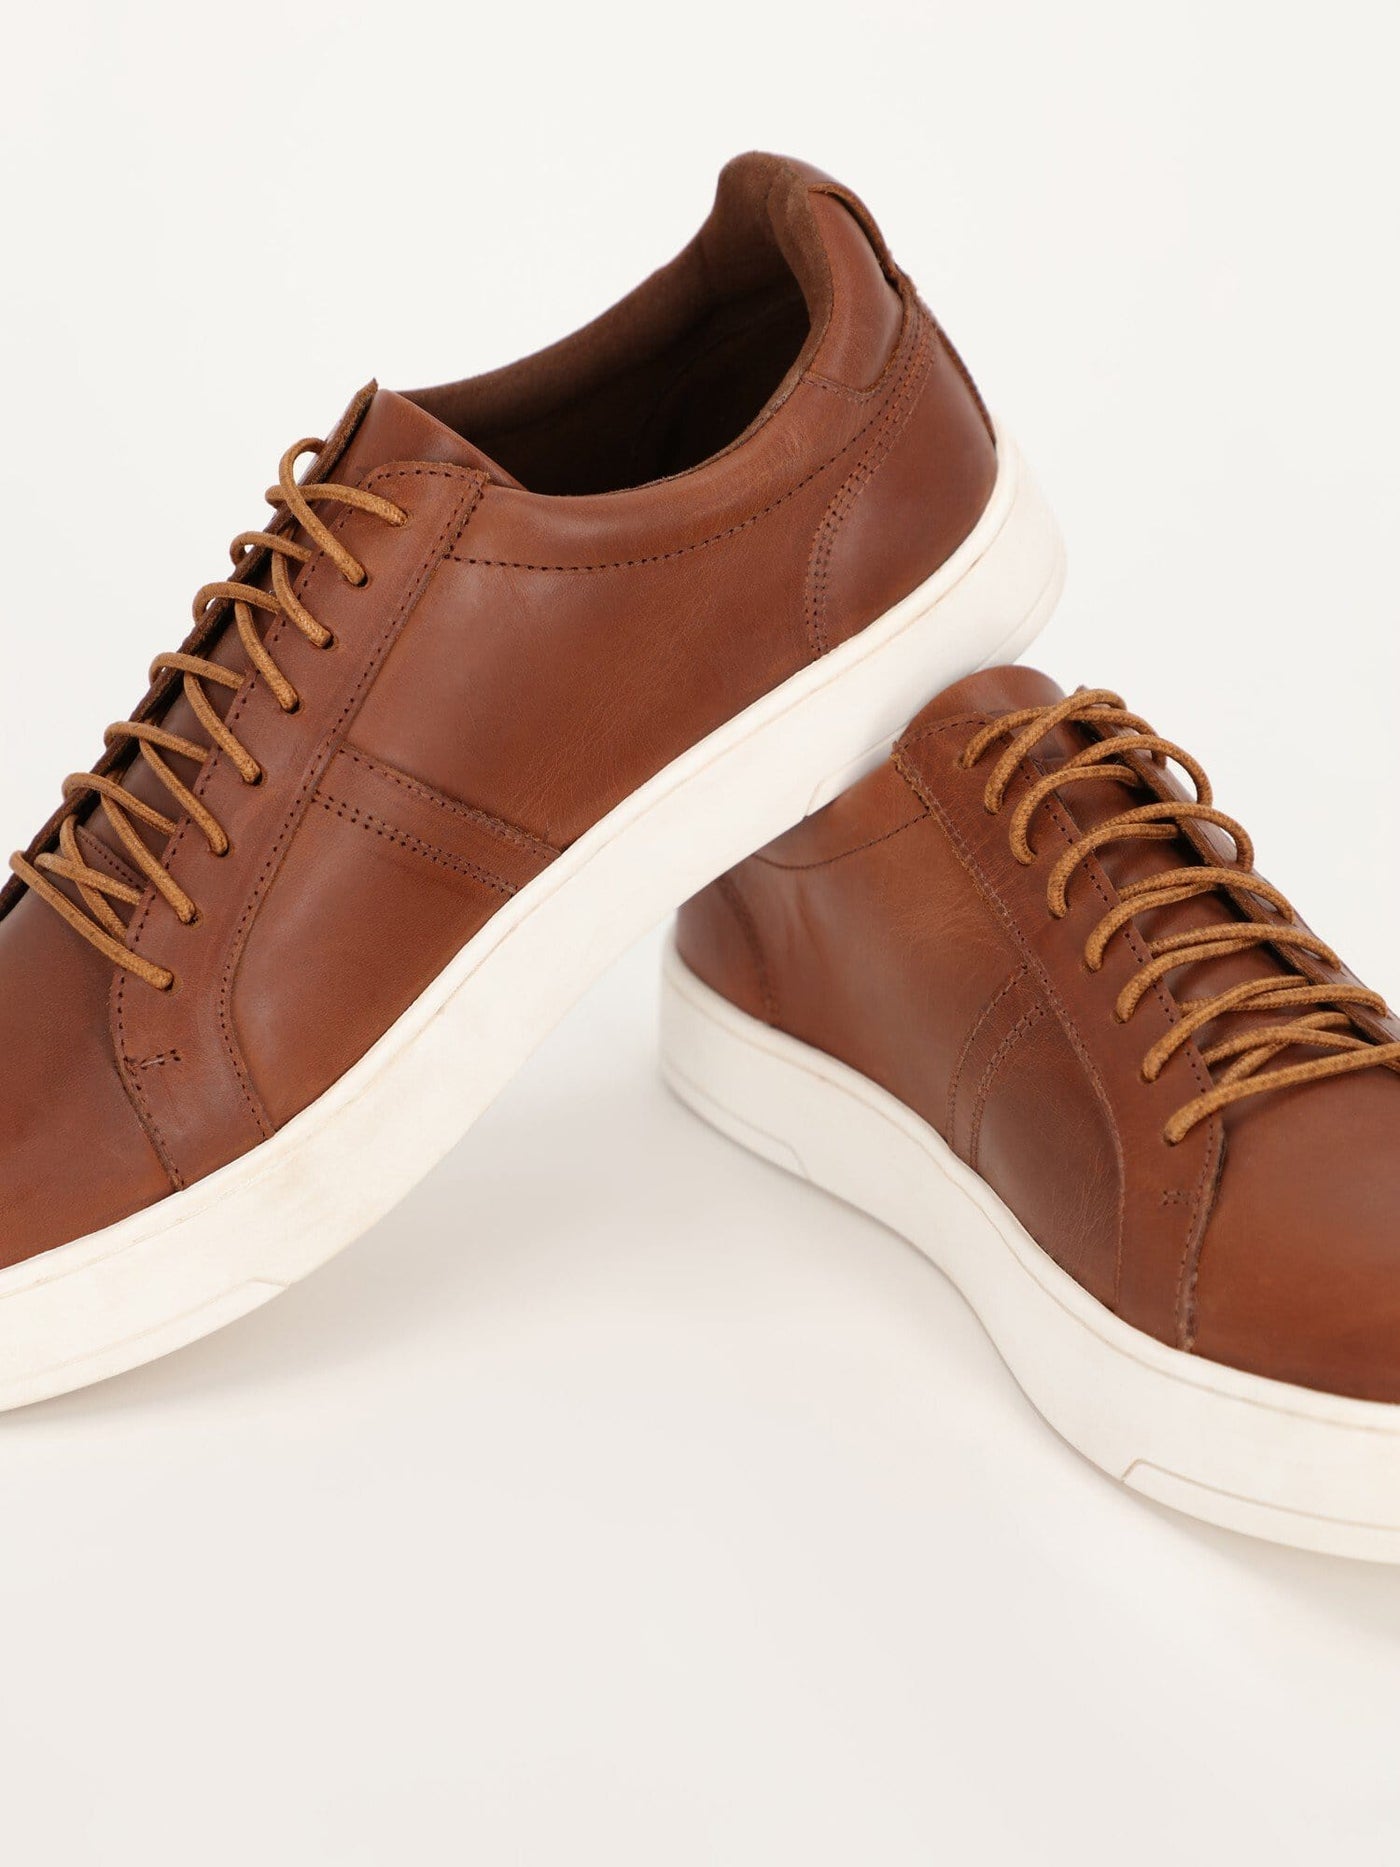 OR Shoes Camel / 41 Lace Up Casual Shoes